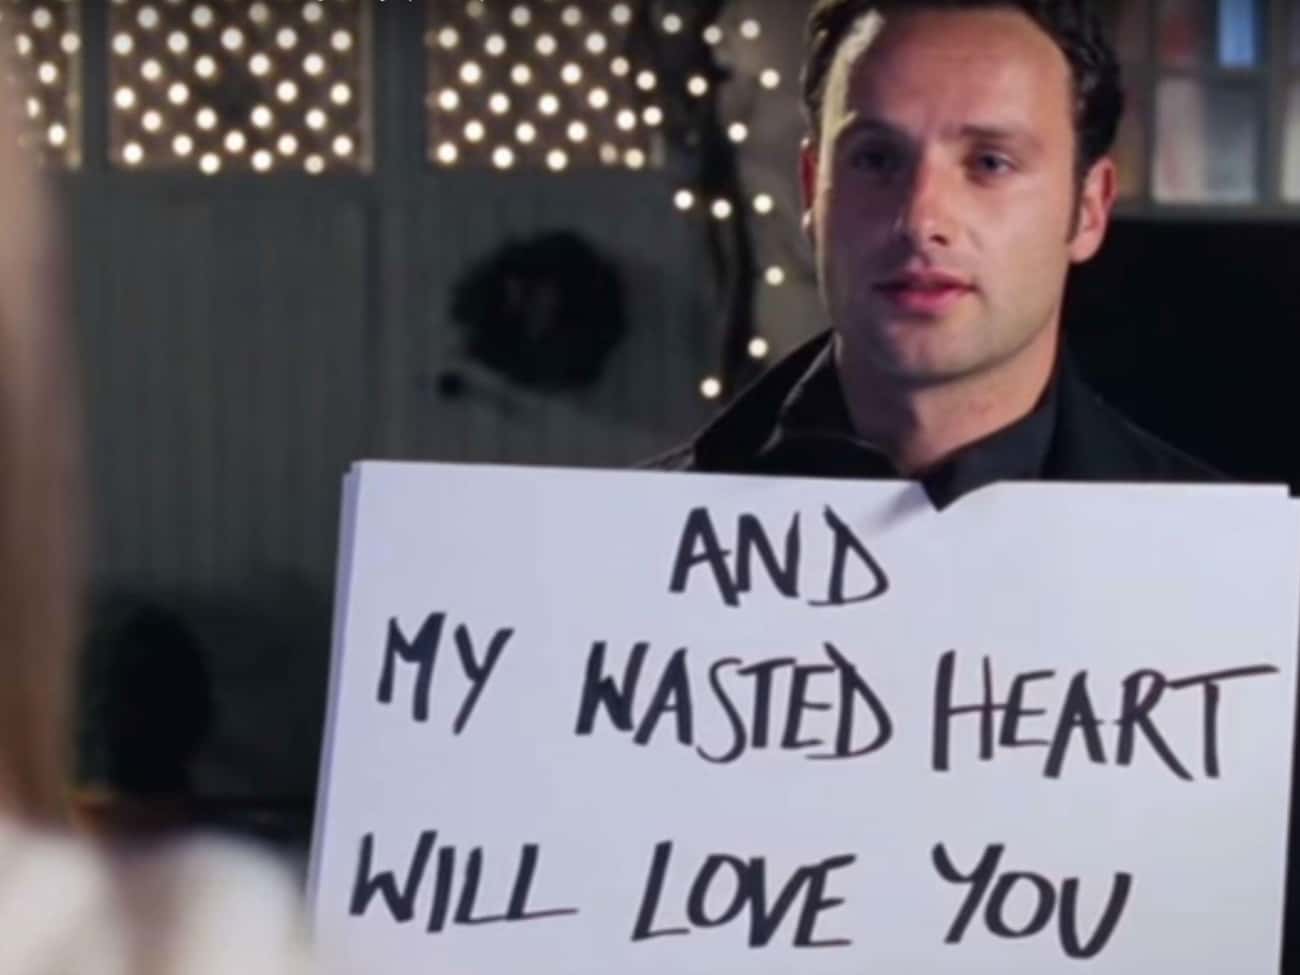 In Love Actually, Mark Provides A Step-By-Step Guide For Turning A Woman Into An Object